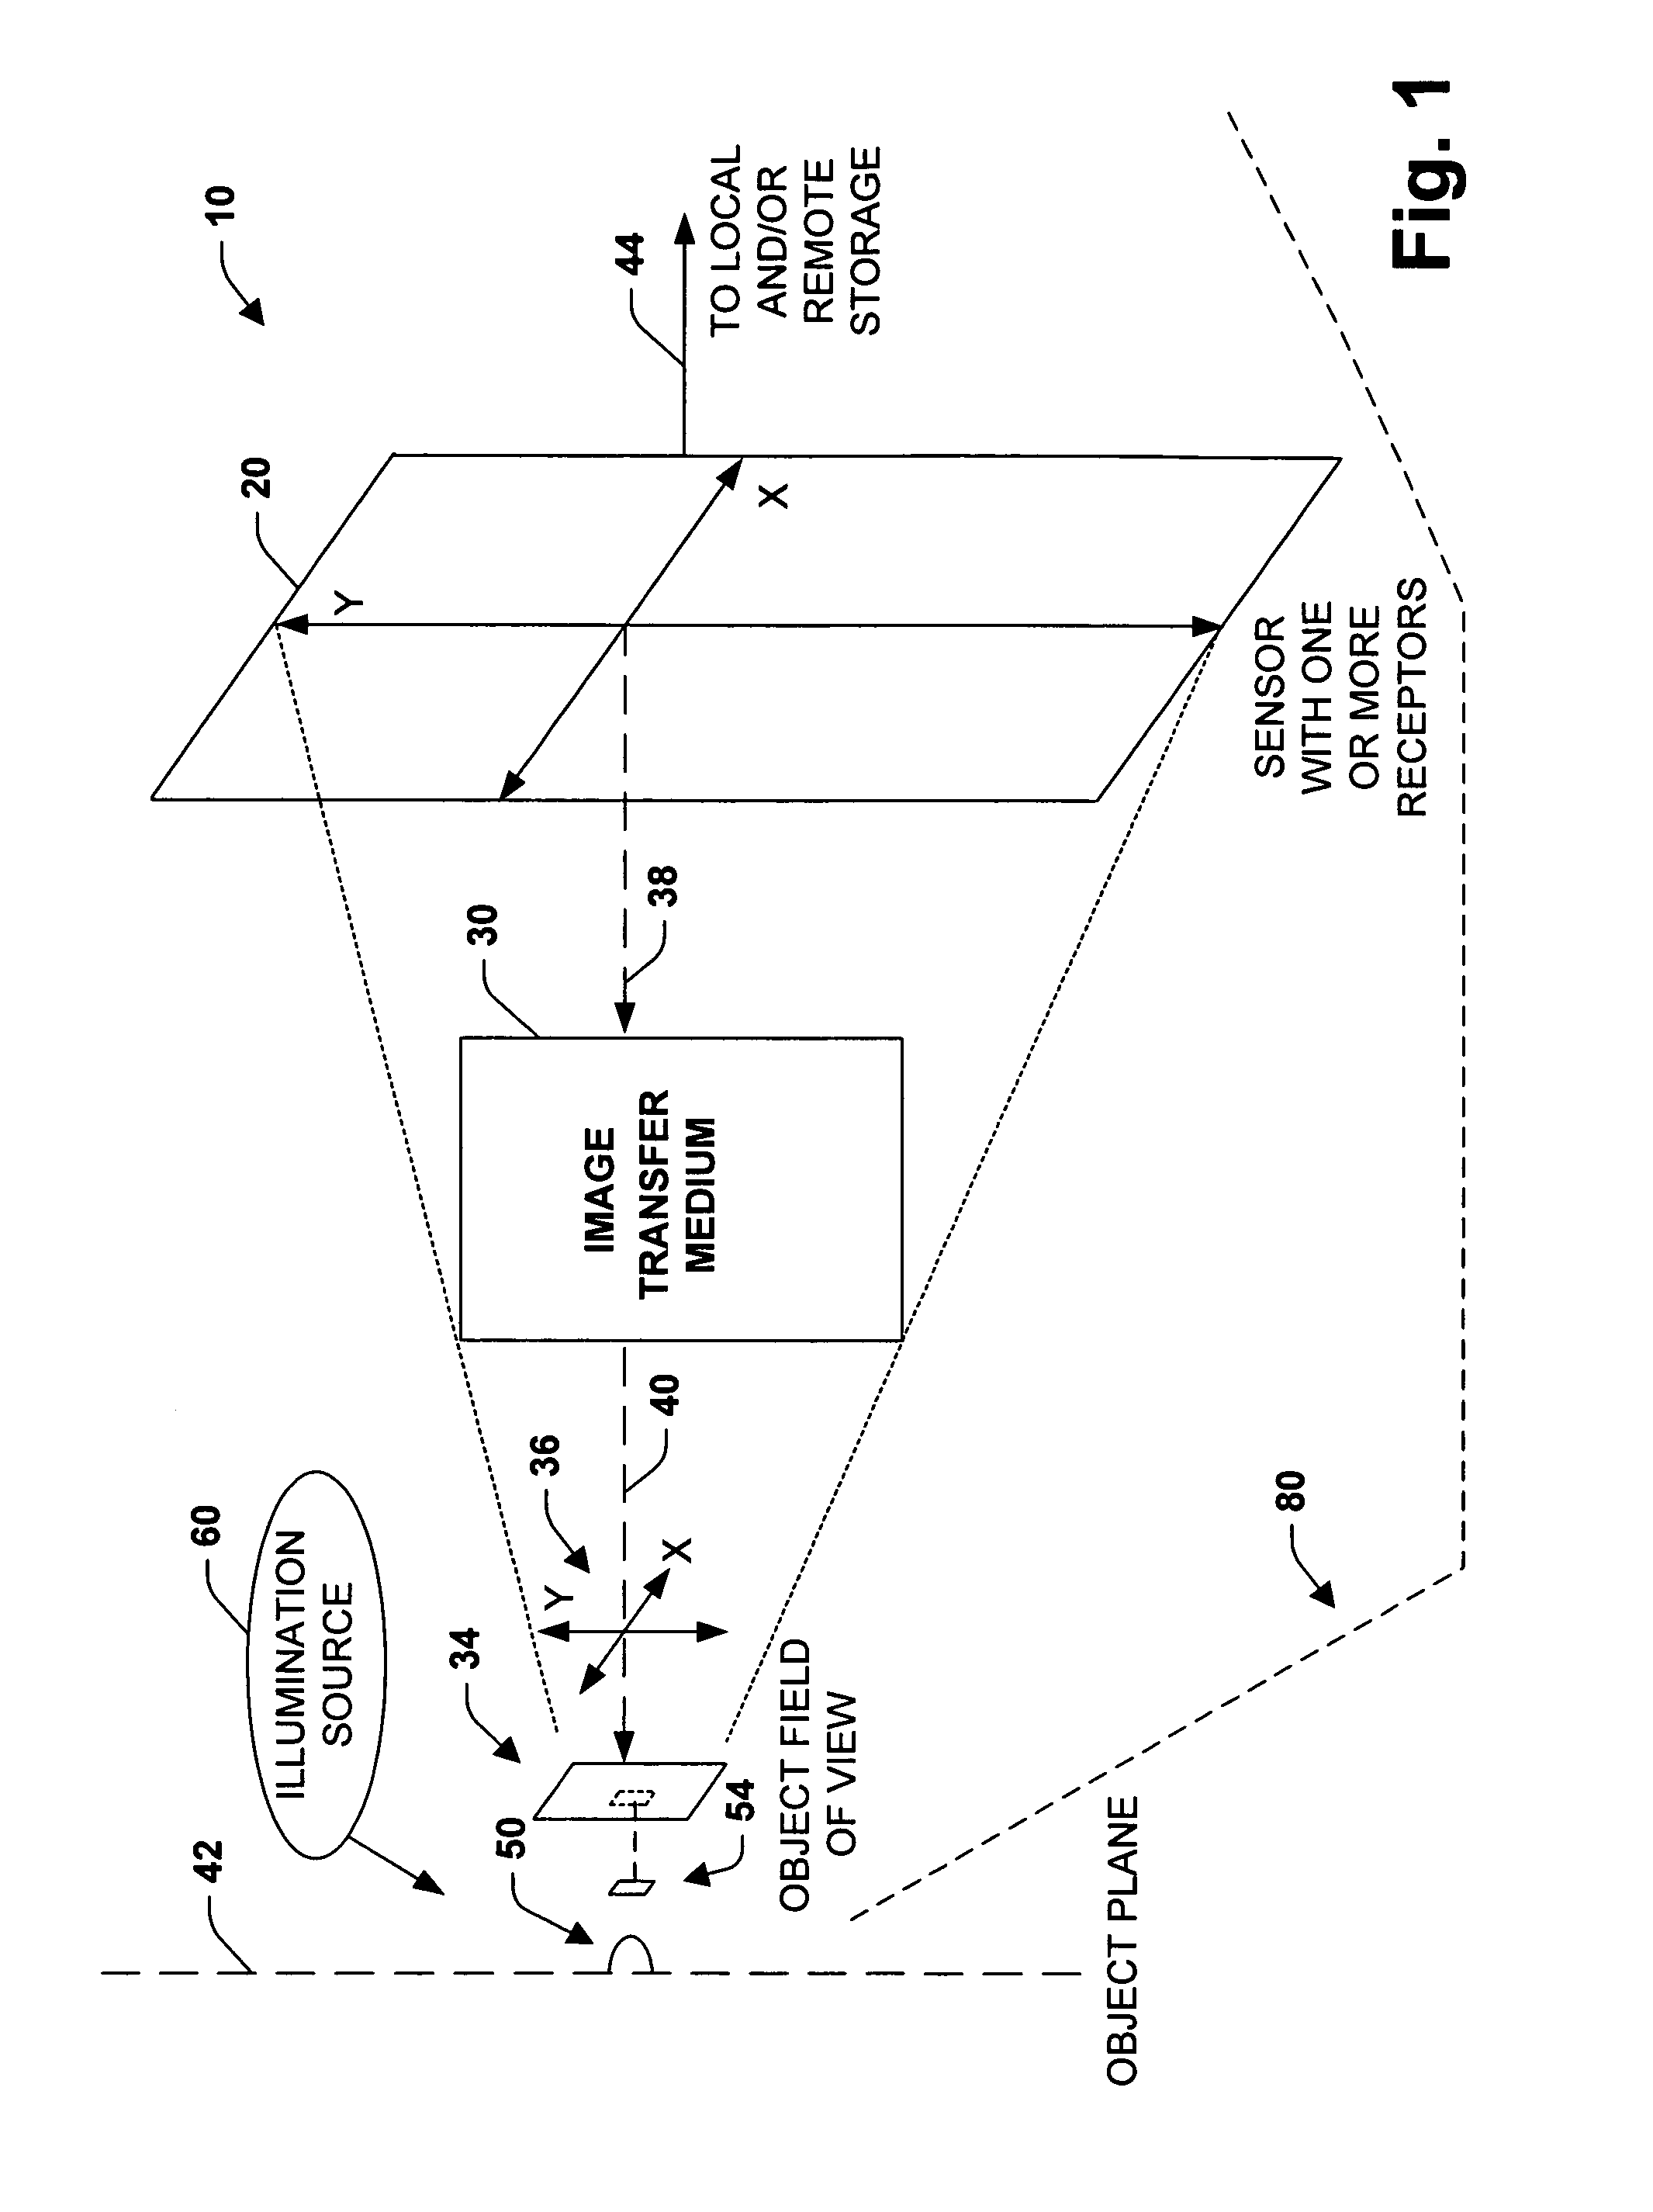 Imaging system, methodology, and applications employing reciprocal space optical design